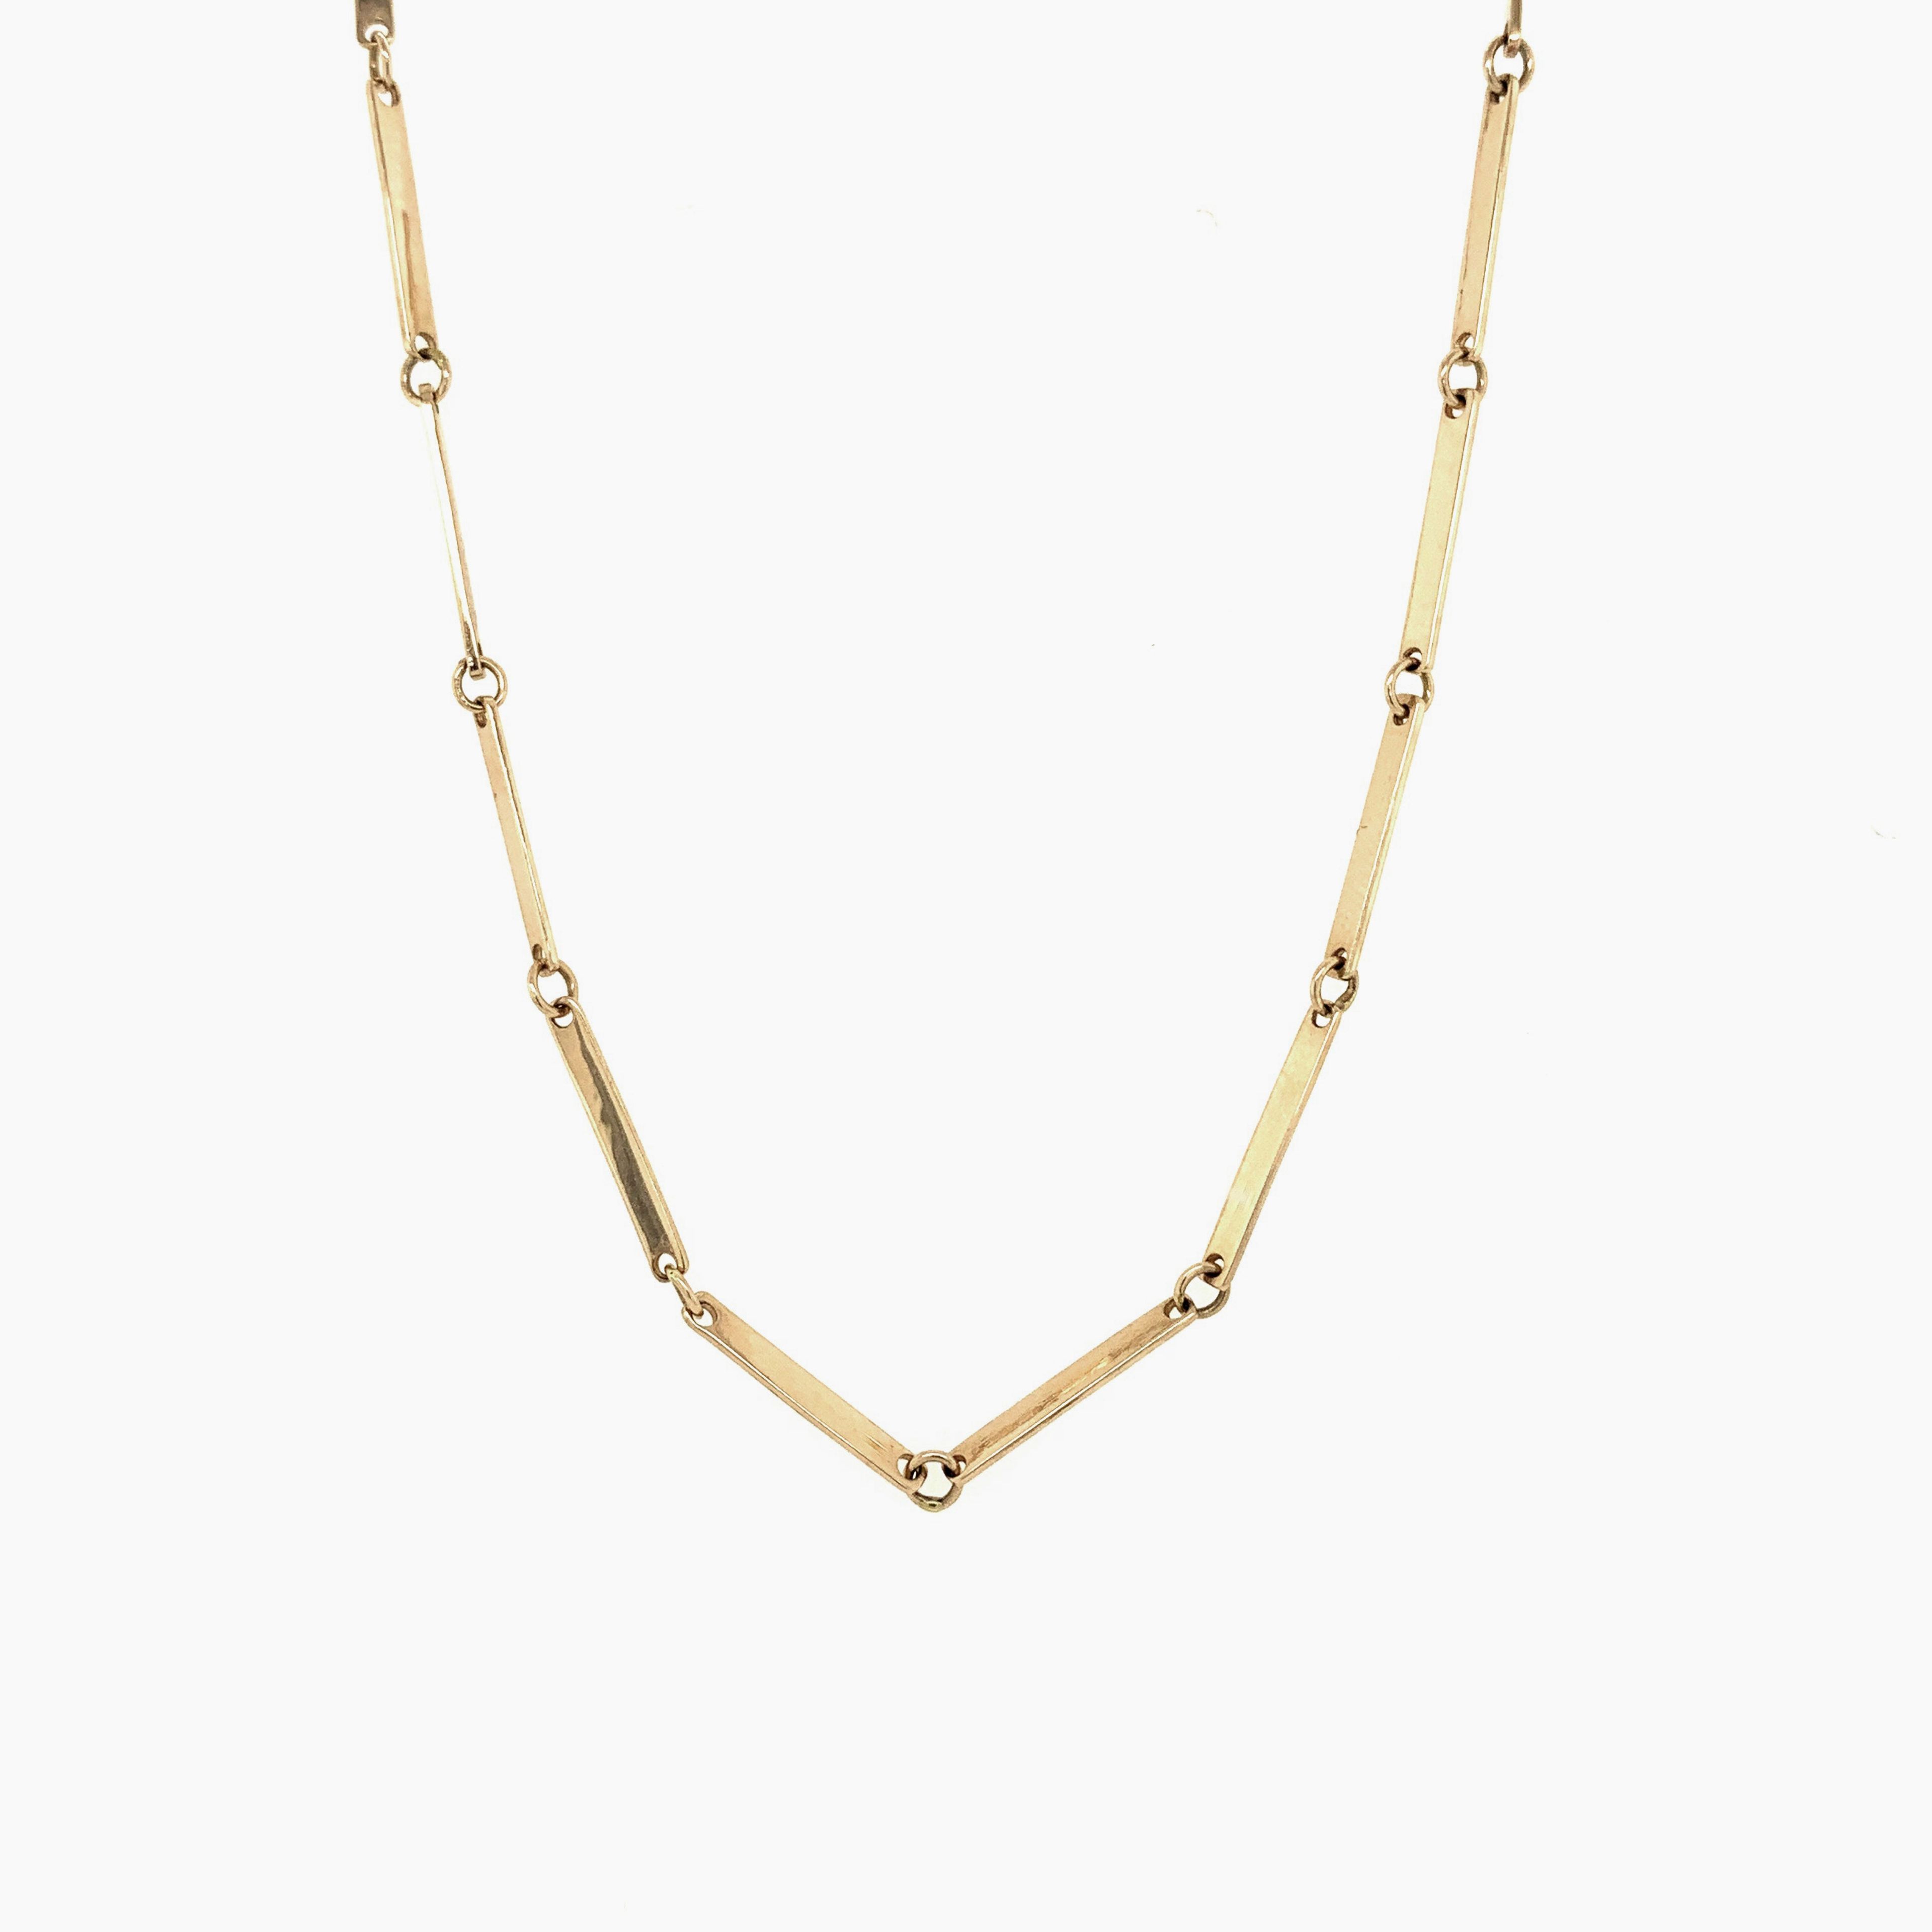 DOEY 14k Gold Flat Link Chain